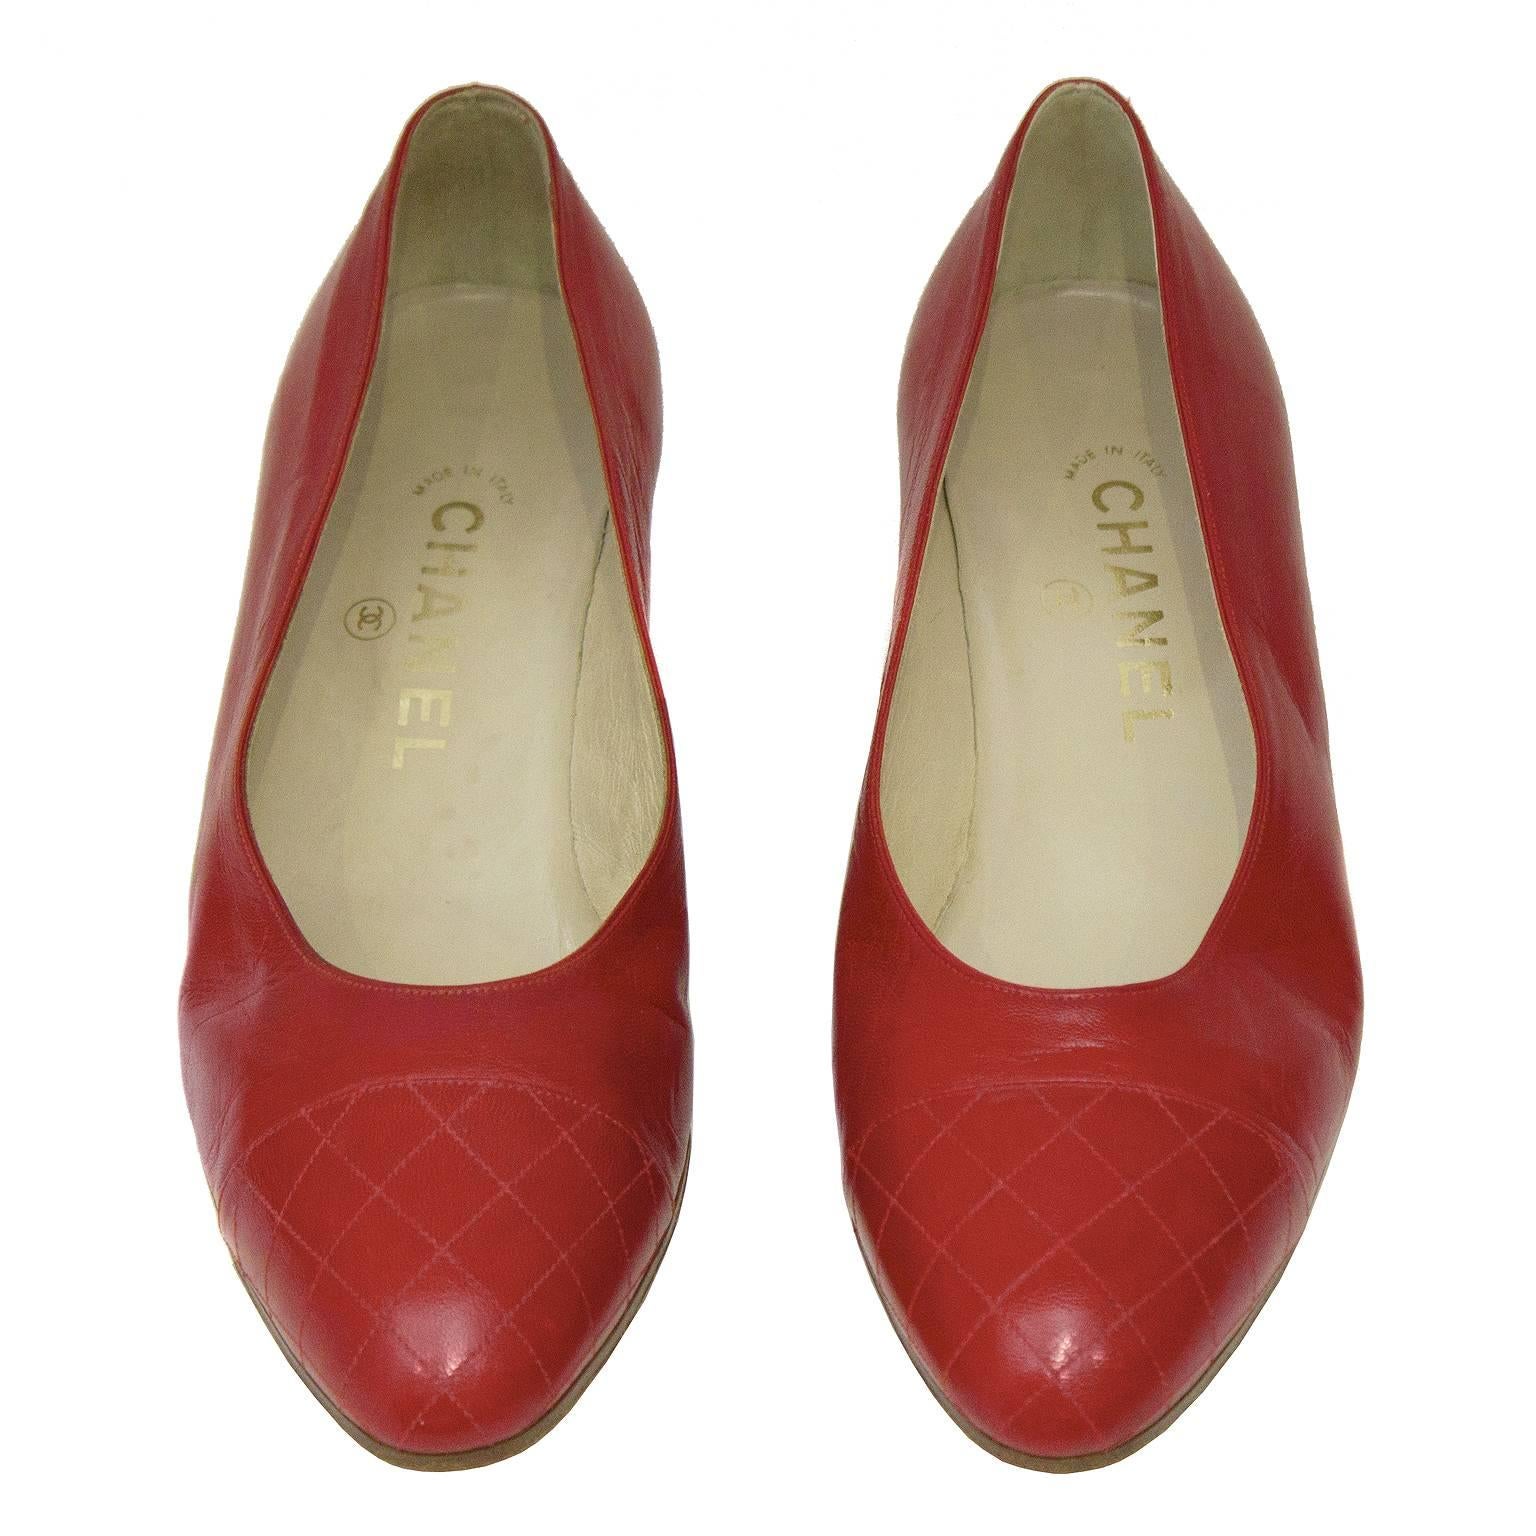 Chanel 1980's red leather pump with a quilted detail on the almond shaped toe. Leather covered tapered low stack heels. The shoes are in pristine, never worn condition. Marked 6½ but fits like a 5 ½ / 6 US.